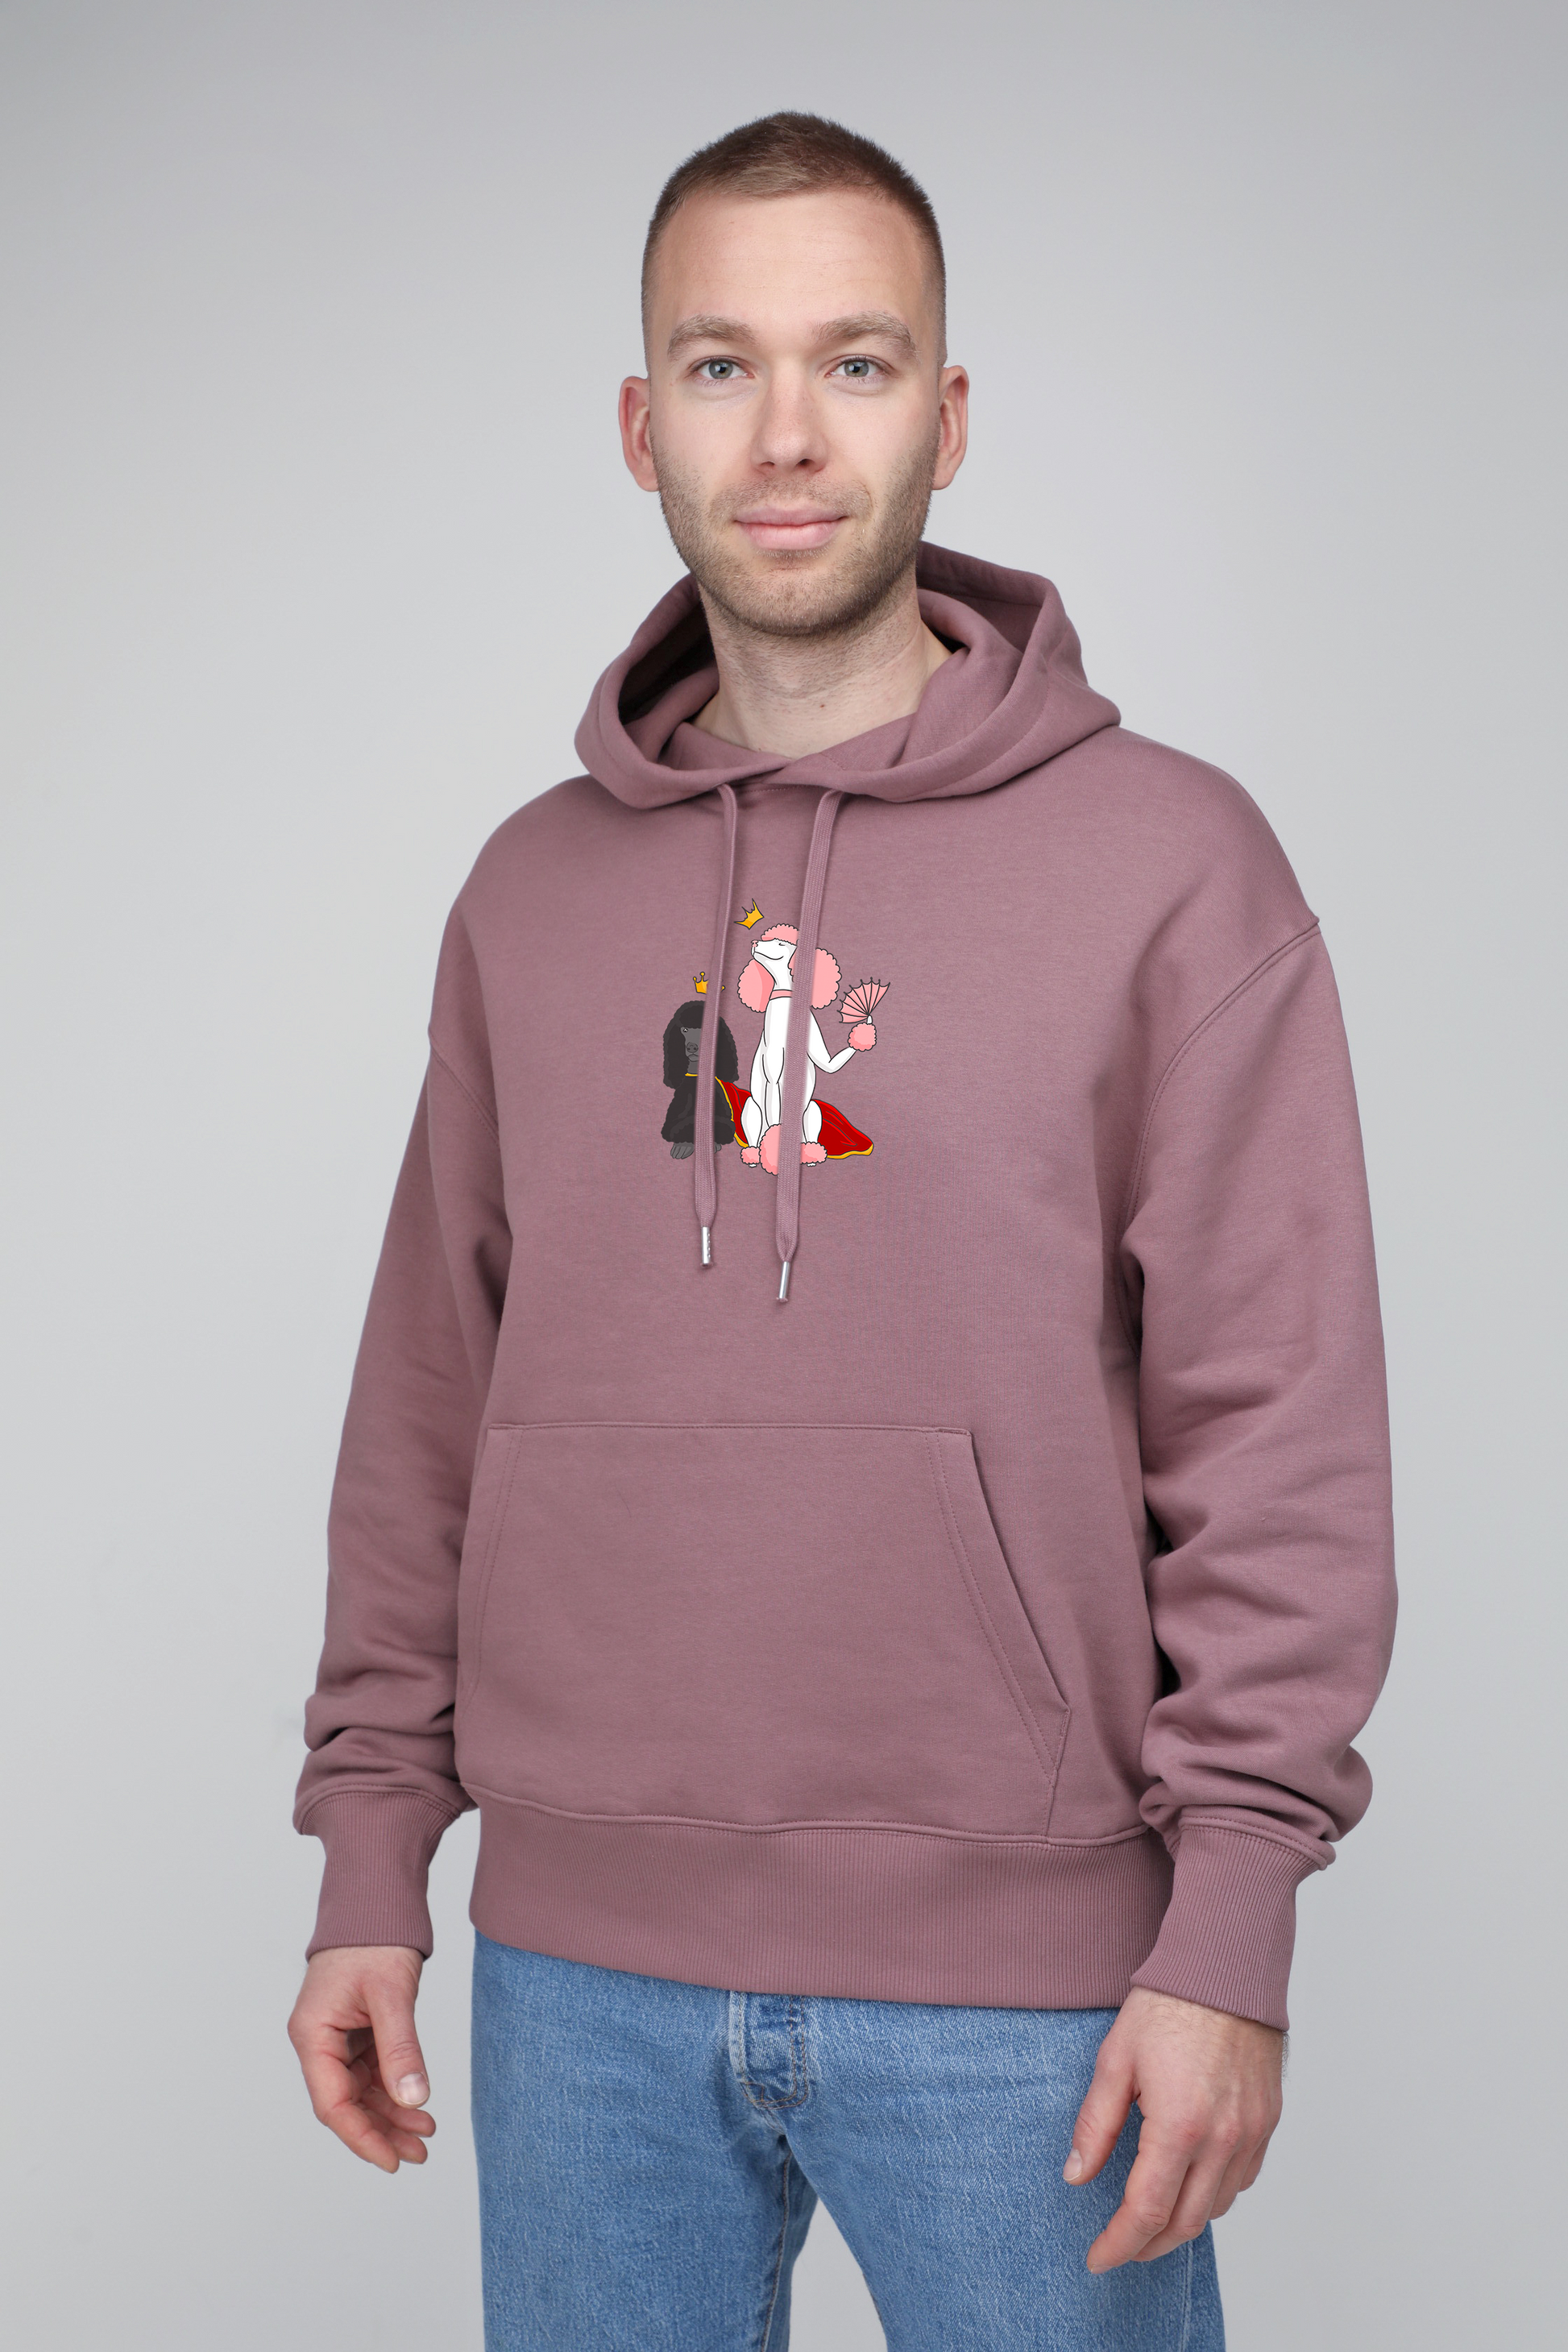 Royal dogs | Hoodie with dogs. Oversize fit | Unisex by My Wild Other